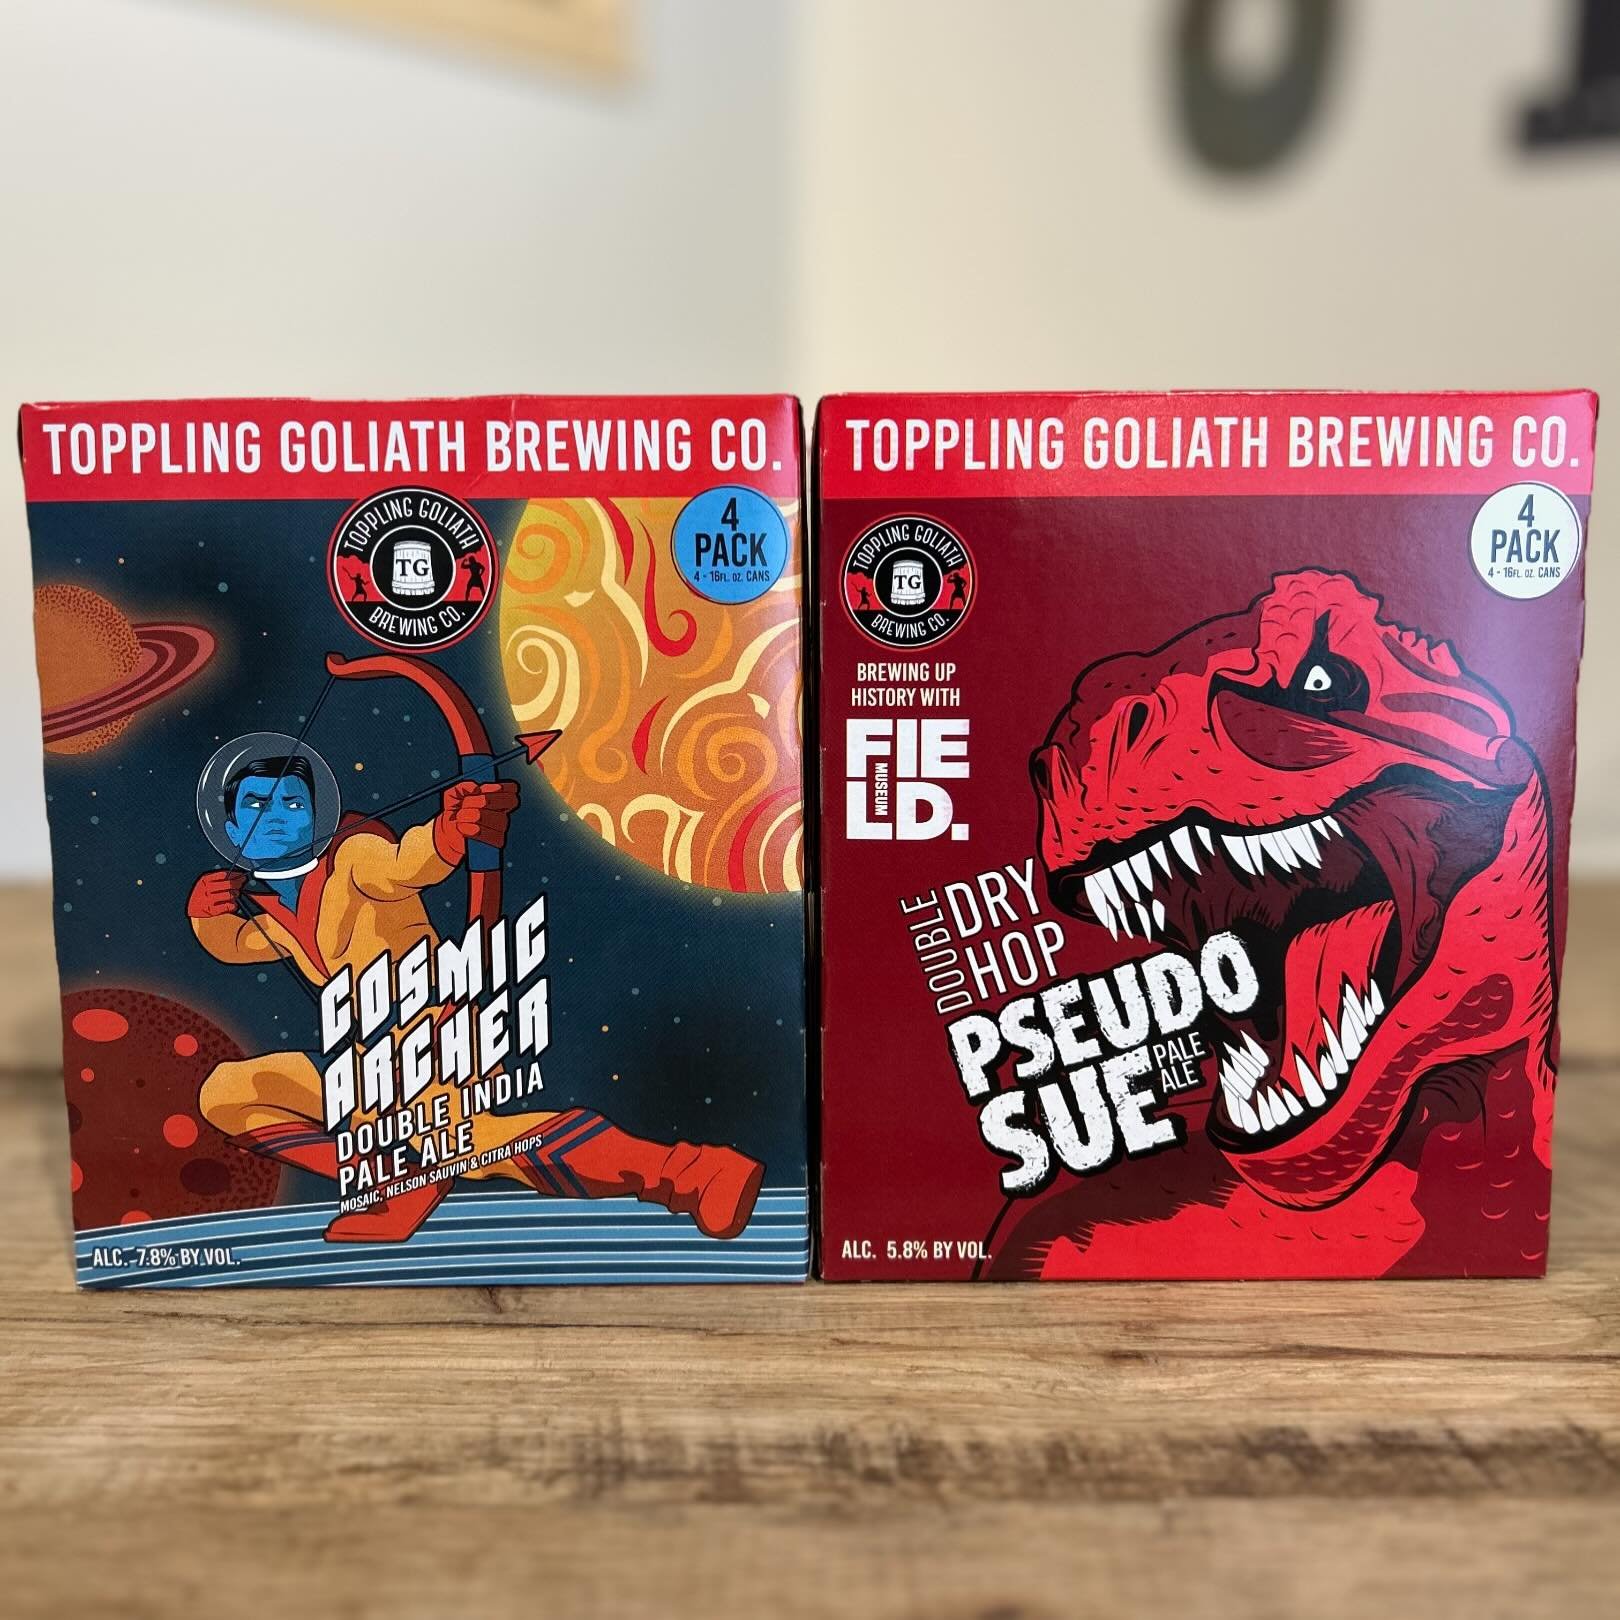 Welcoming @topplingbrews back to the shop this week #NowAvailable #SudburyCraftBeer #SudburyMA
&mdash;
COSMIC ARCHER | DOUBLE IPA | 7.8% ABV

After searching to the ends of the galaxy for hop flavors worth writing home about, Cosmic Archer points his